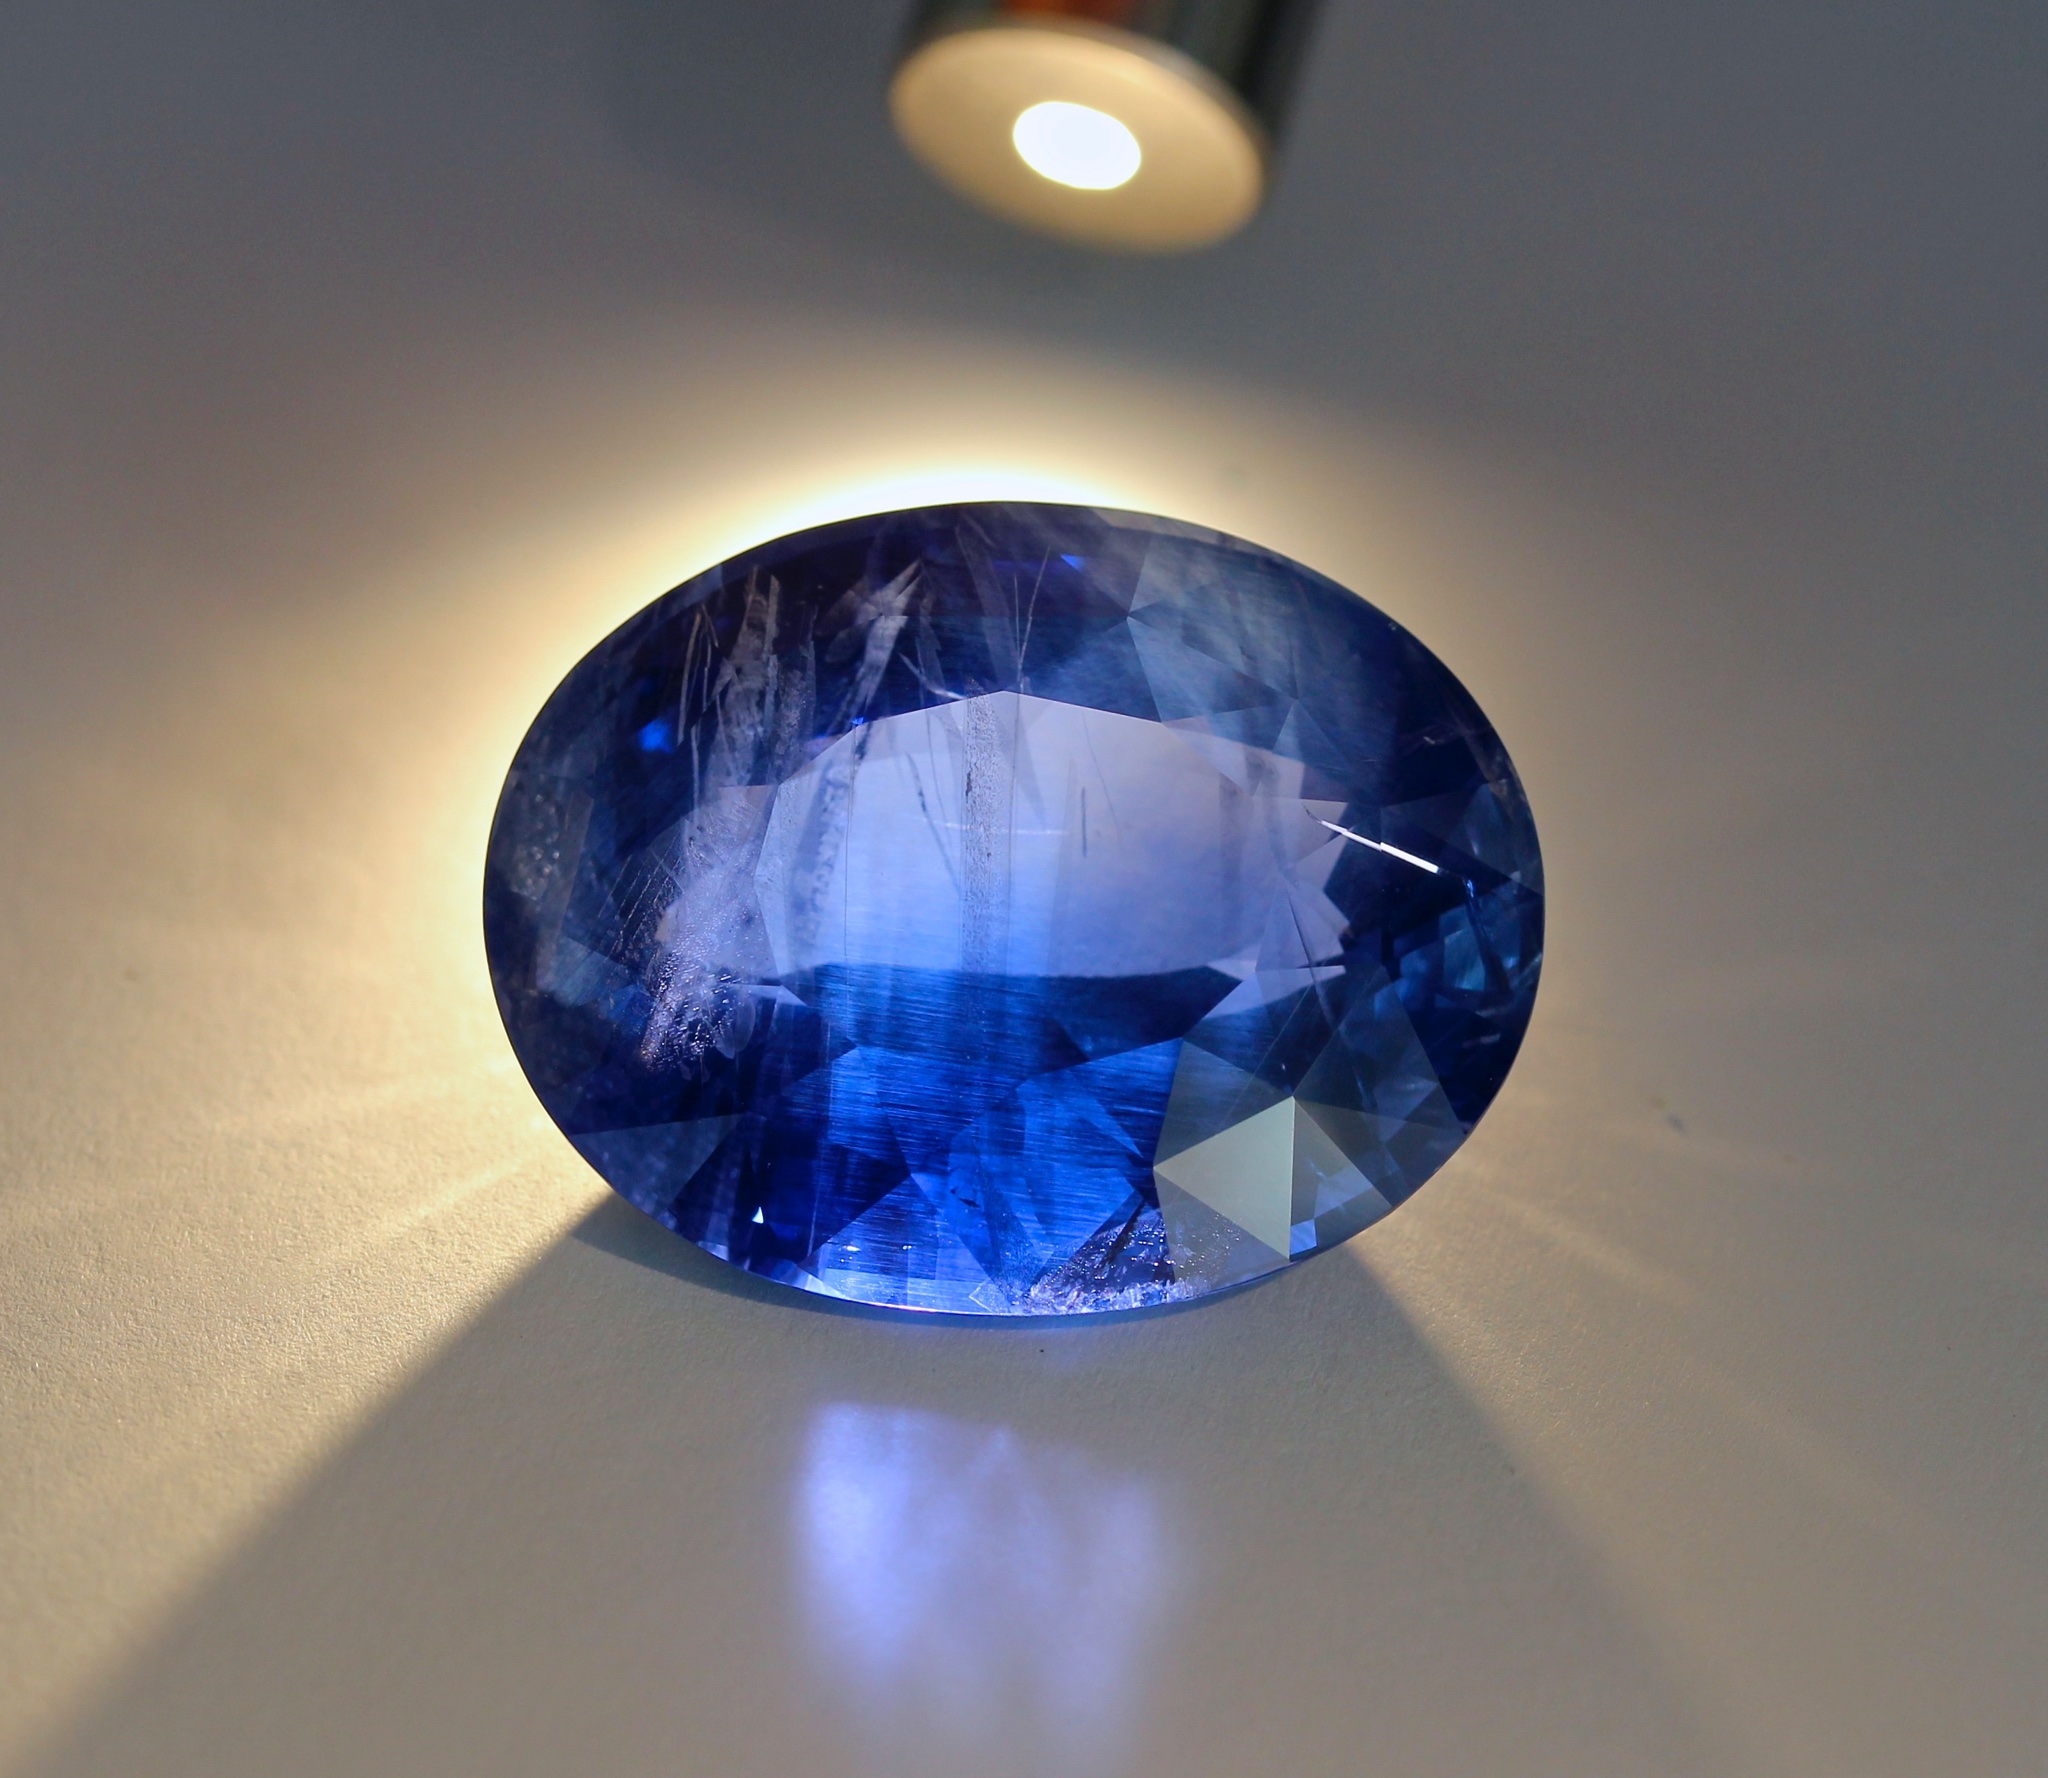 100 carat + sapphire with twinning lines that indicate the joining of two crystals